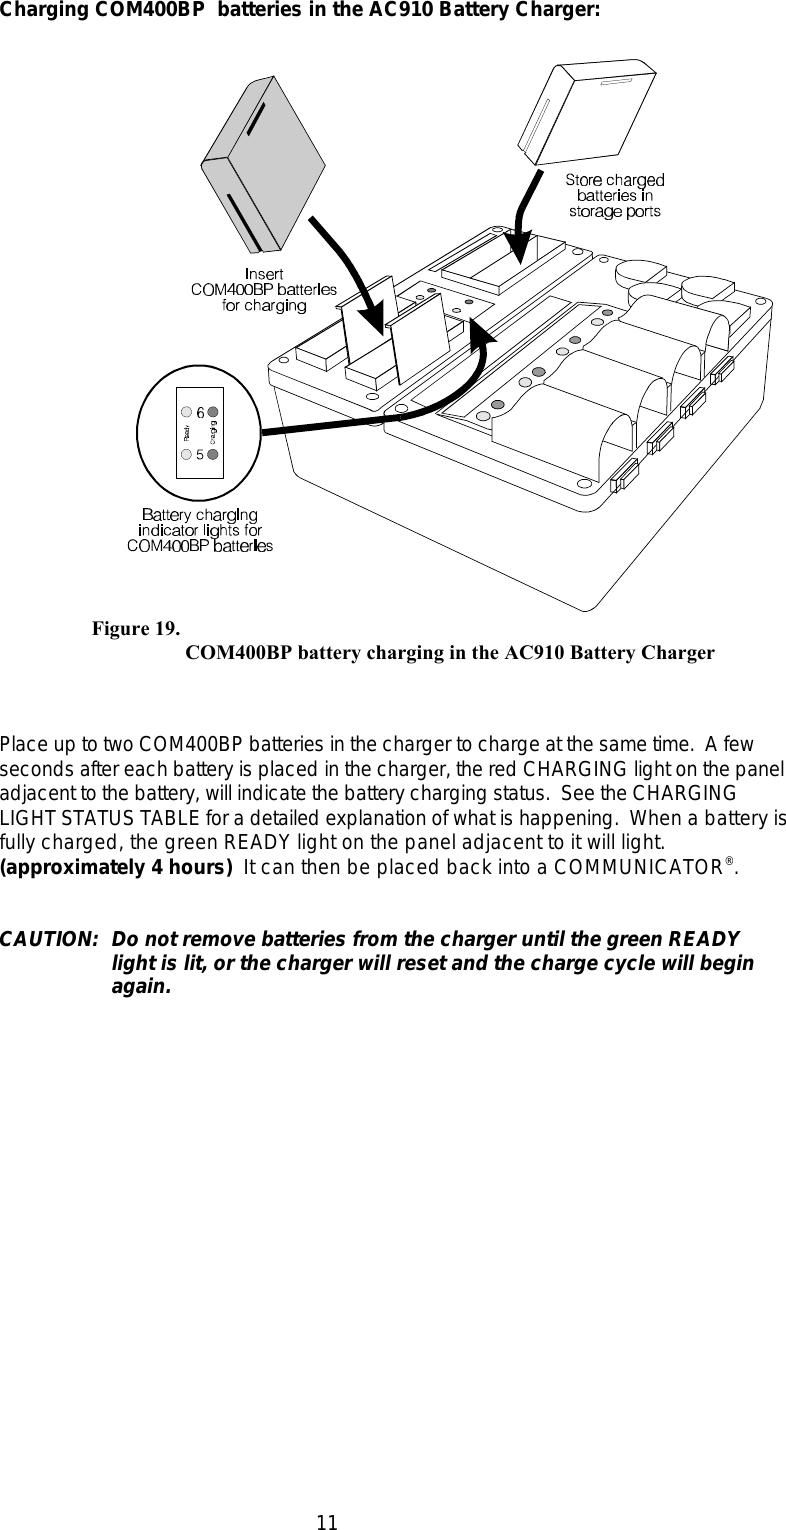 11  Figure 19. COM400BP battery charging in the AC910 Battery ChargerCharging COM400BP  batteries in the AC910 Battery Charger:Place up to two COM400BP batteries in the charger to charge at the same time.  A fewseconds after each battery is placed in the charger, the red CHARGING light on the paneladjacent to the battery, will indicate the battery charging status.  See the CHARGINGLIGHT STATUS TABLE for a detailed explanation of what is happening.  When a battery isfully charged, the green READY light on the panel adjacent to it will light. (approximately 4 hours)  It can then be placed back into a COMMUNICATOR .®CAUTION: Do not remove batteries from the charger until the green READYlight is lit, or the charger will reset and the charge cycle will beginagain.